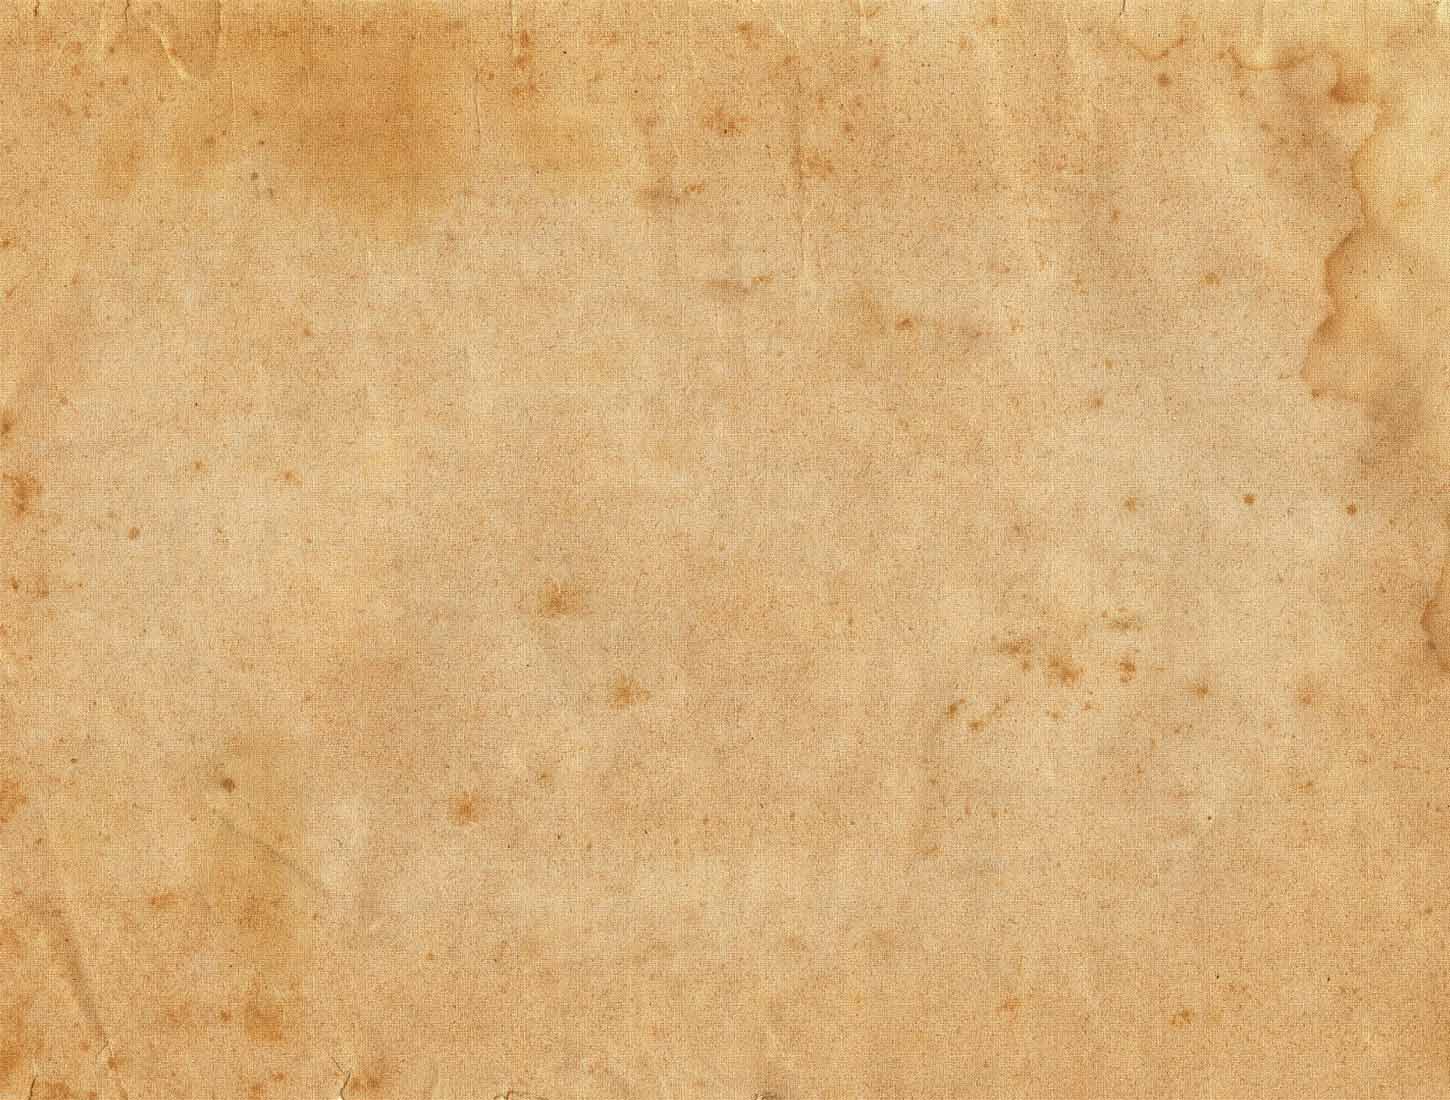 Old Beige Blank Paper Picture